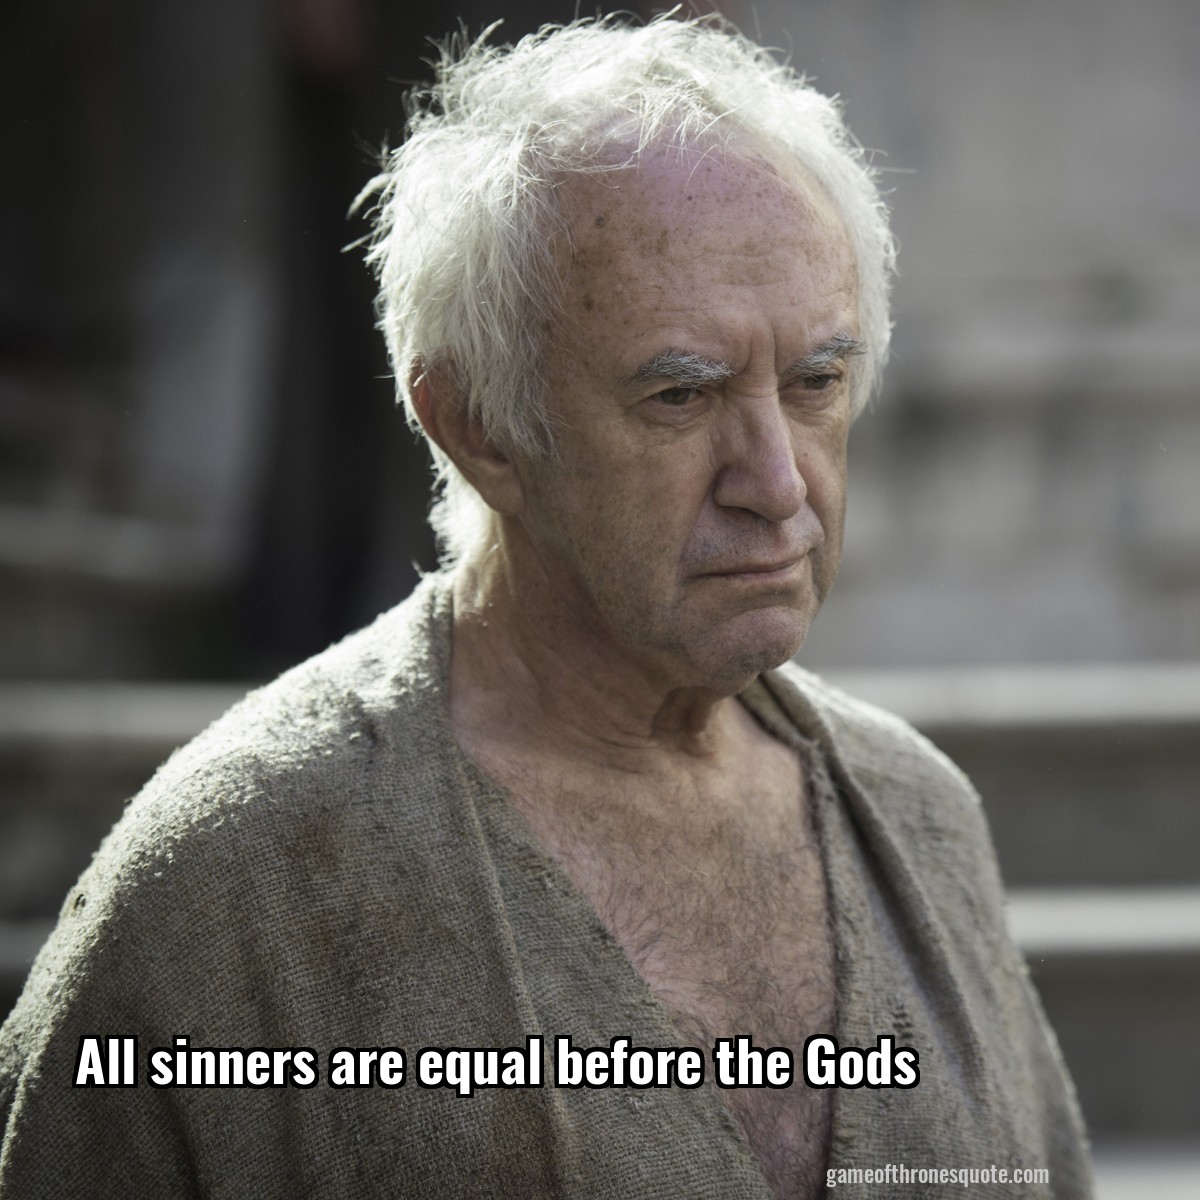 All sinners are equal before the Gods